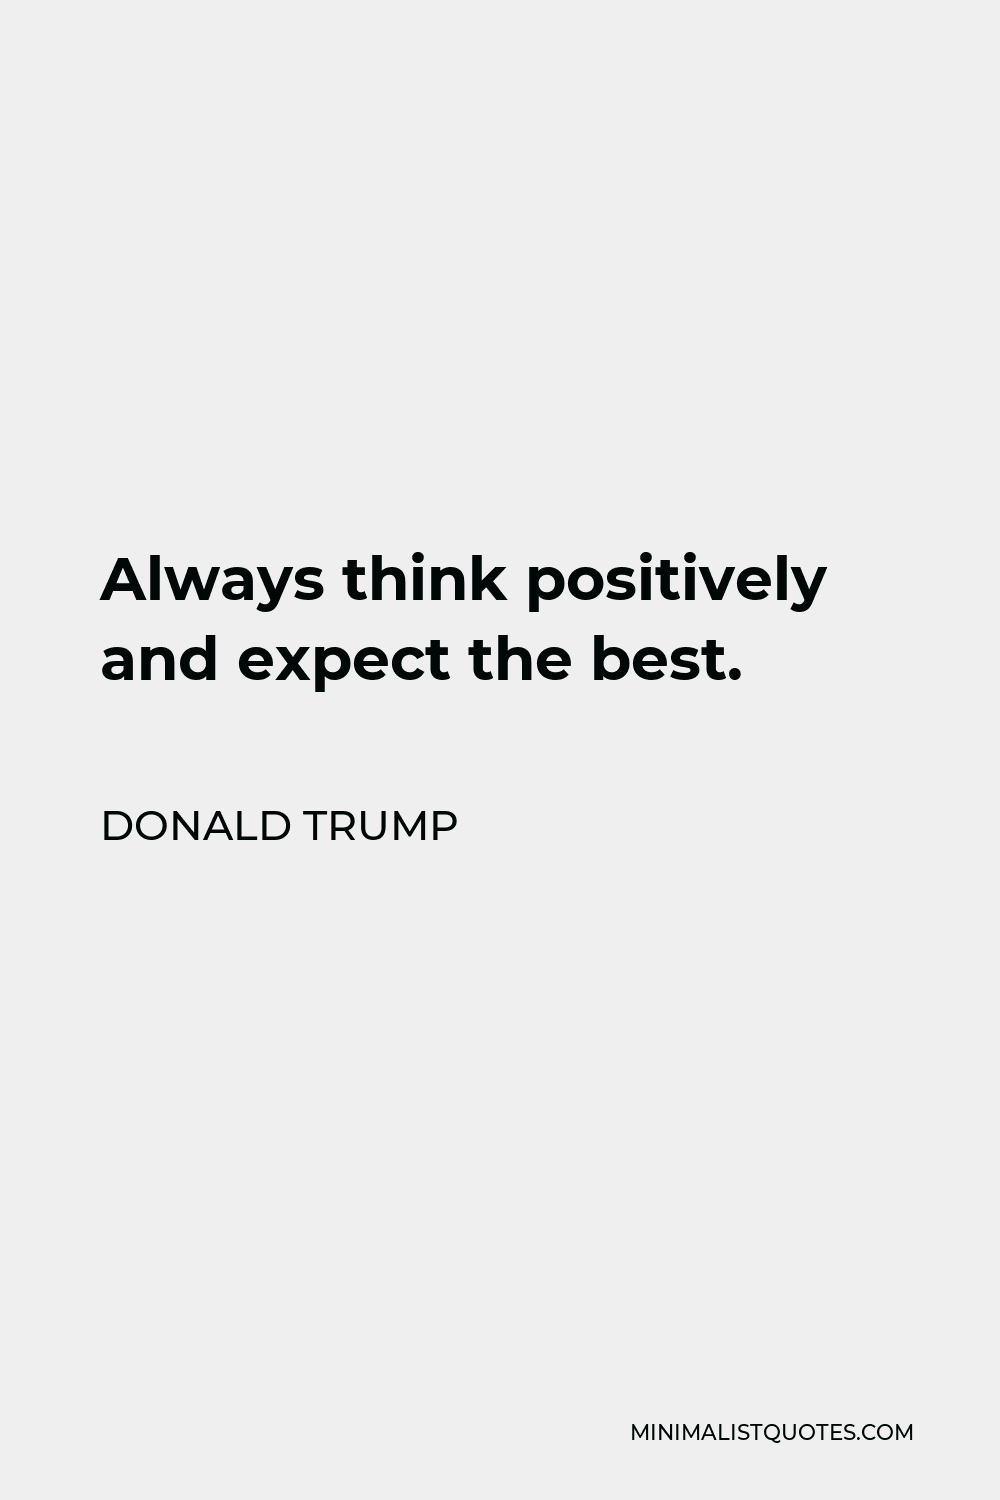 Donald Trump Quote - Always think positively and expect the best.